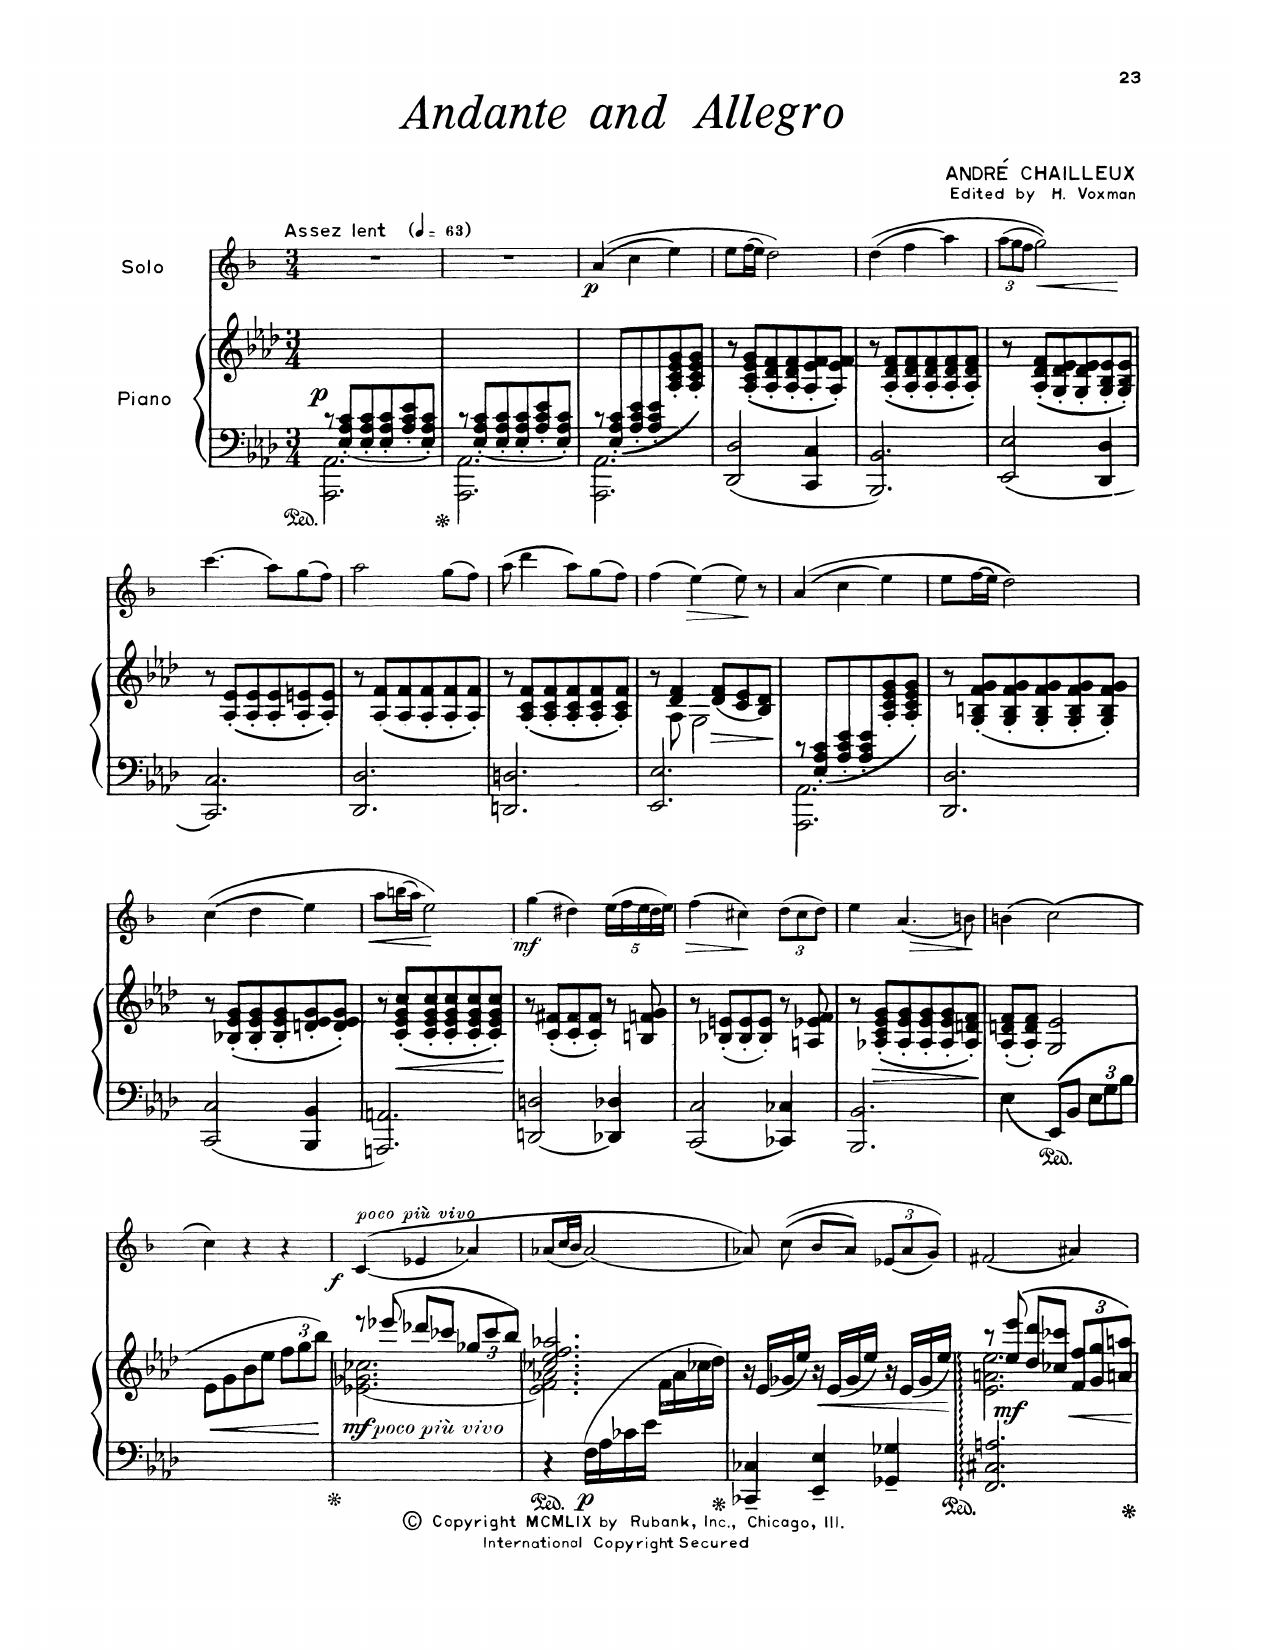 André Chailleux Andante & Allegro sheet music notes printable PDF score